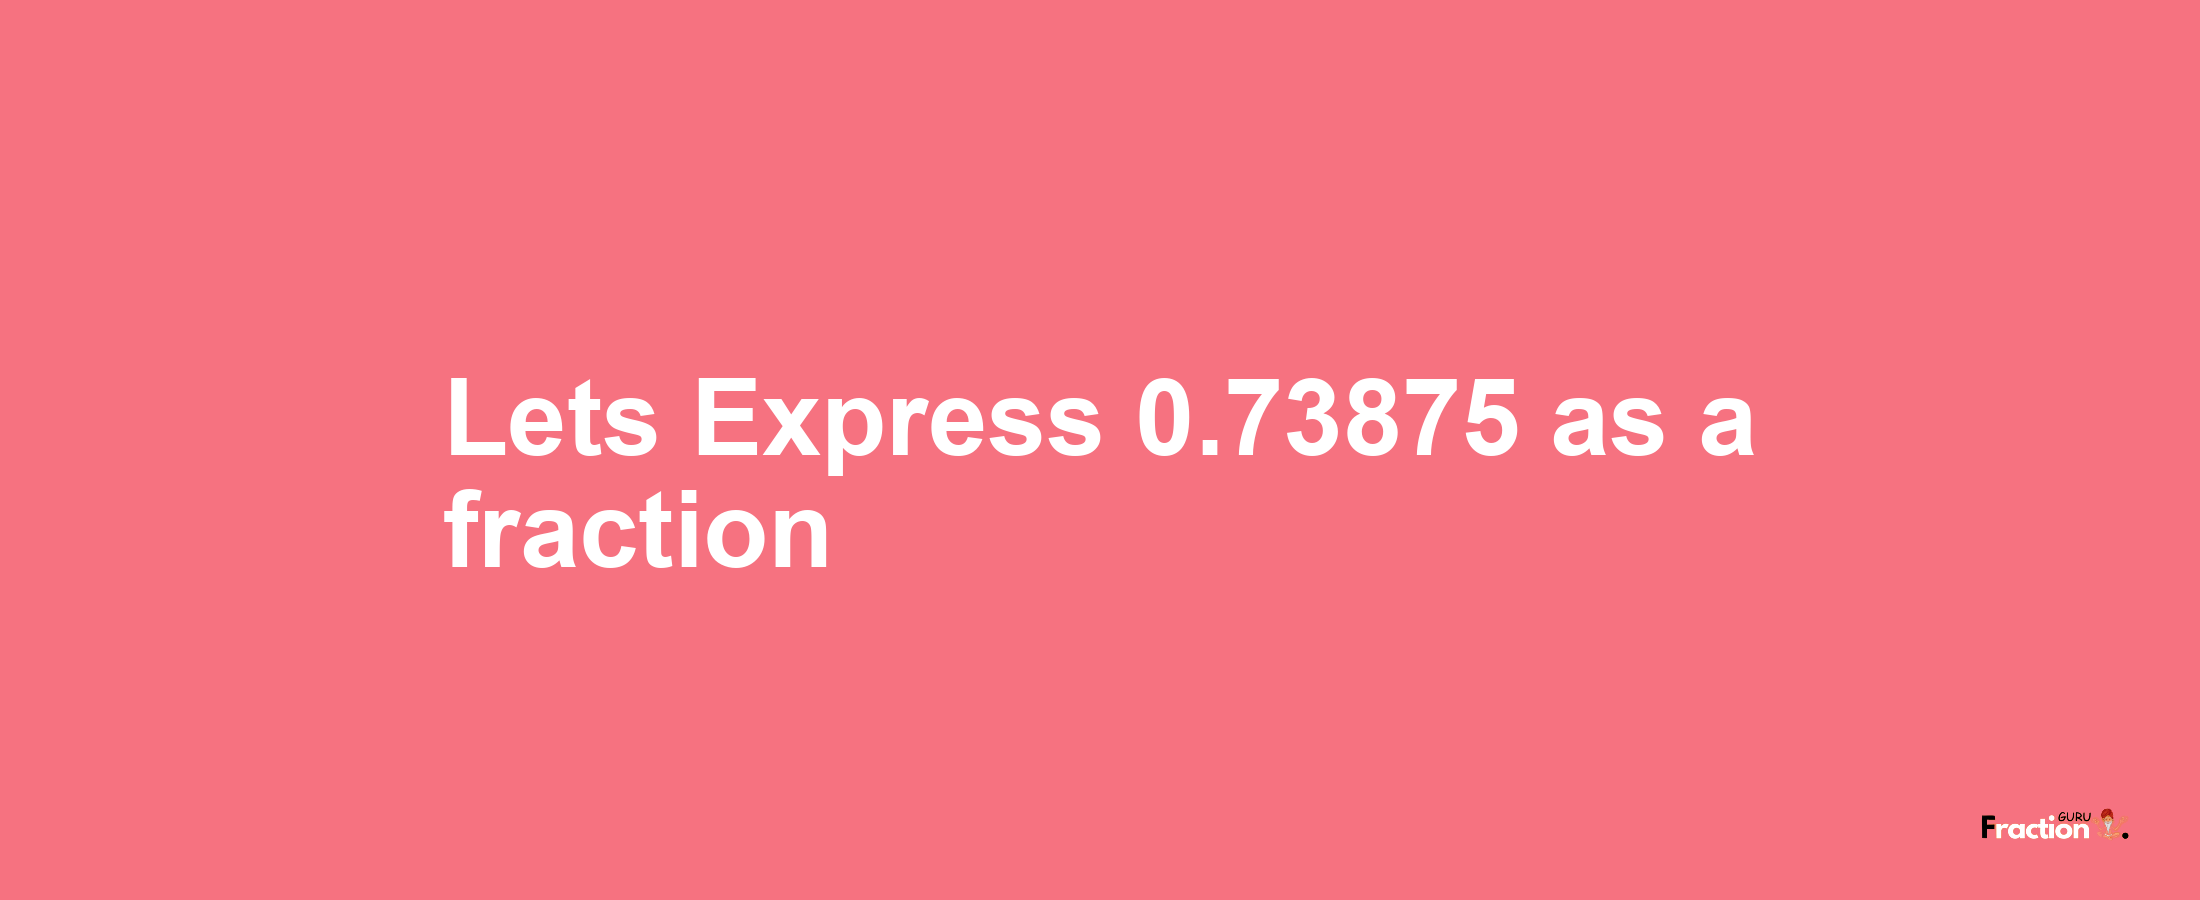 Lets Express 0.73875 as afraction